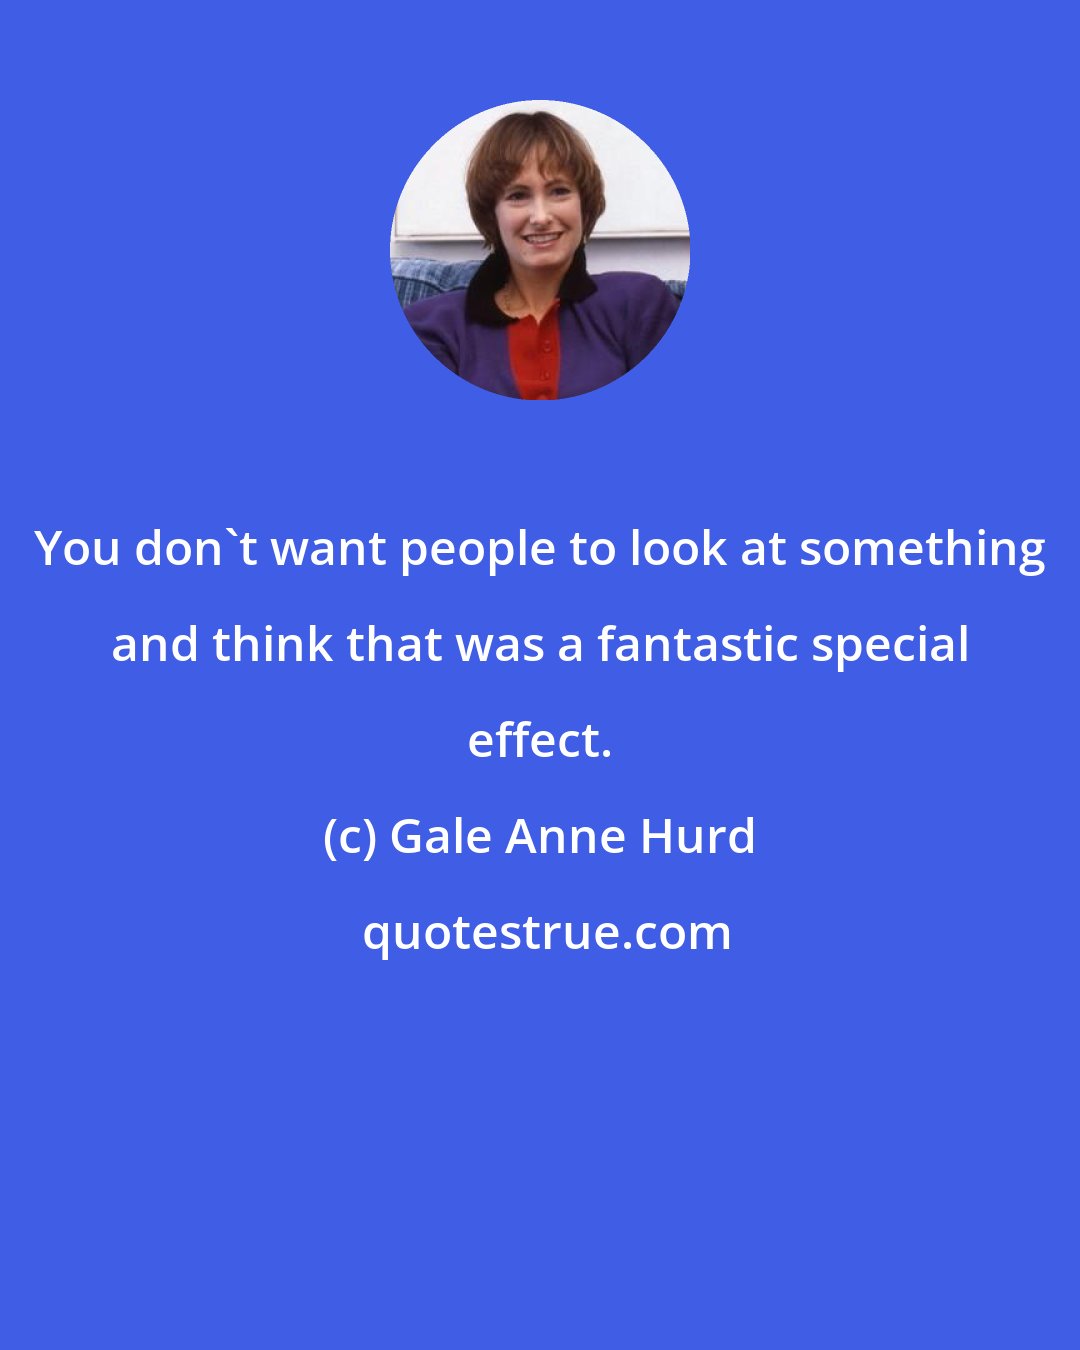 Gale Anne Hurd: You don't want people to look at something and think that was a fantastic special effect.